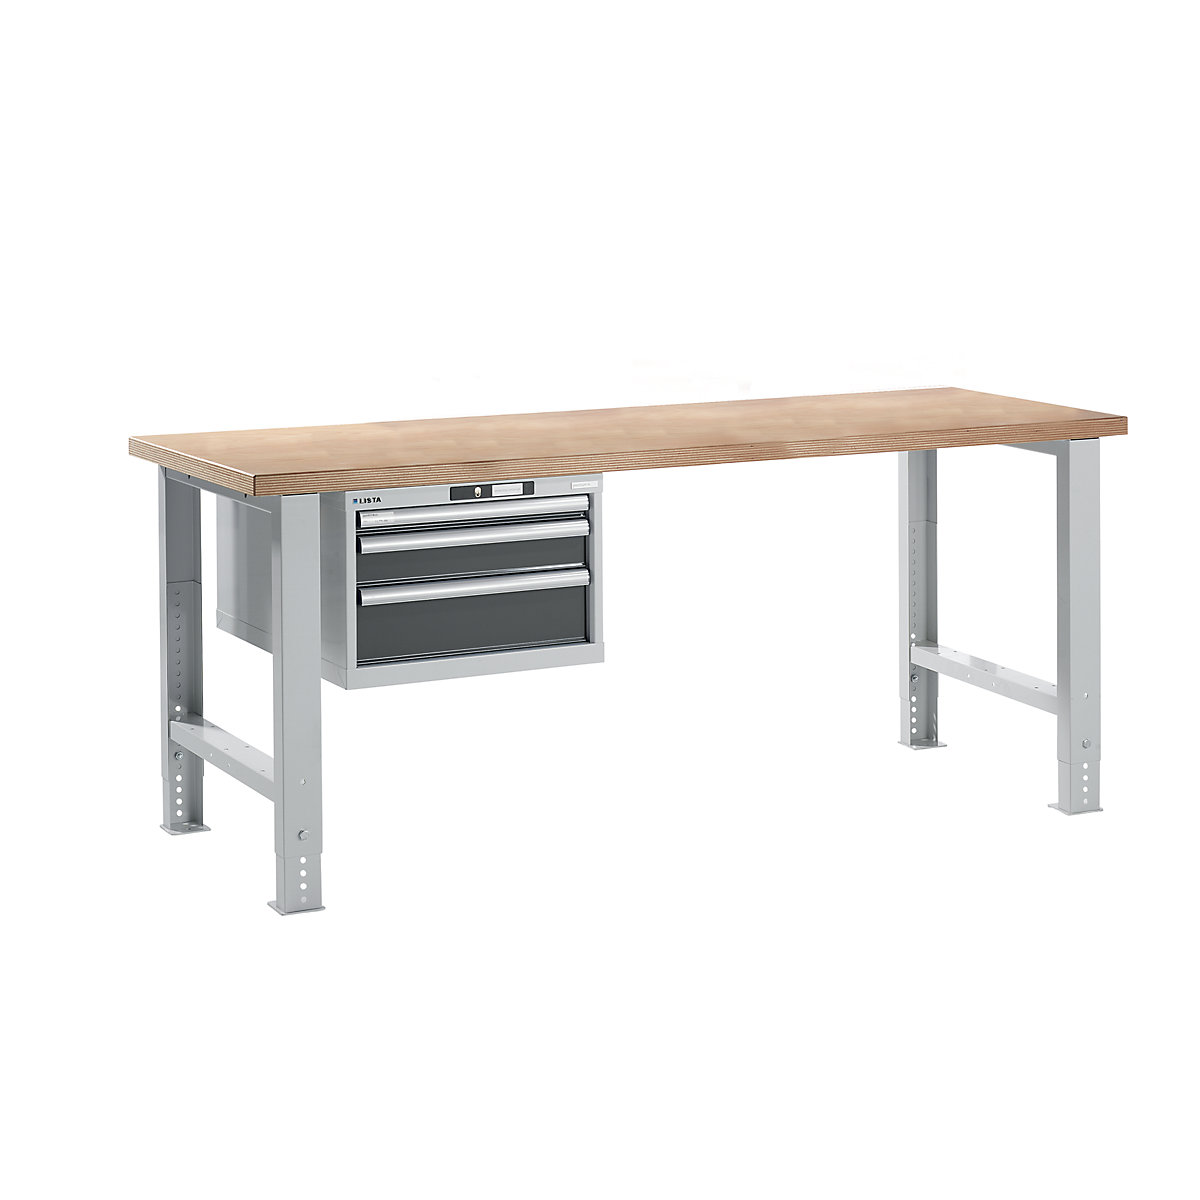 Modular workbench – LISTA, height 740 – 1090 mm, suspended drawer unit, 3 drawers, metallic grey, table width 2000 mm-4